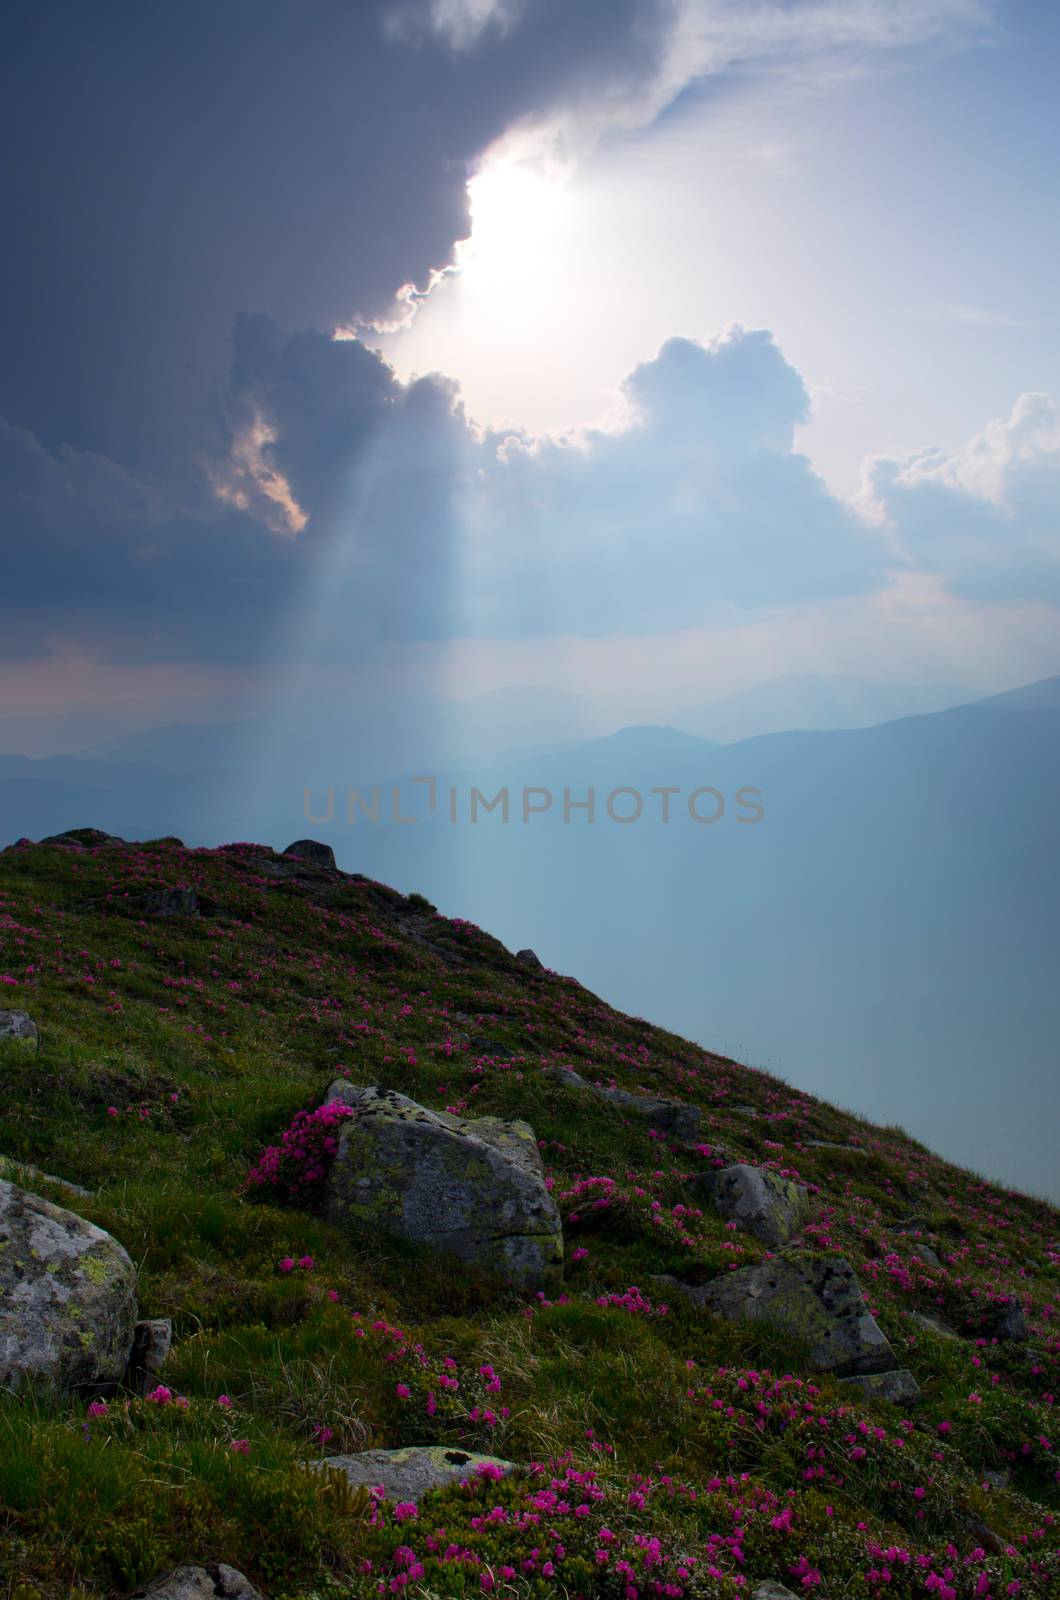 Amazing mountain landscape with flower of rhododendron. Carpathian Mountains